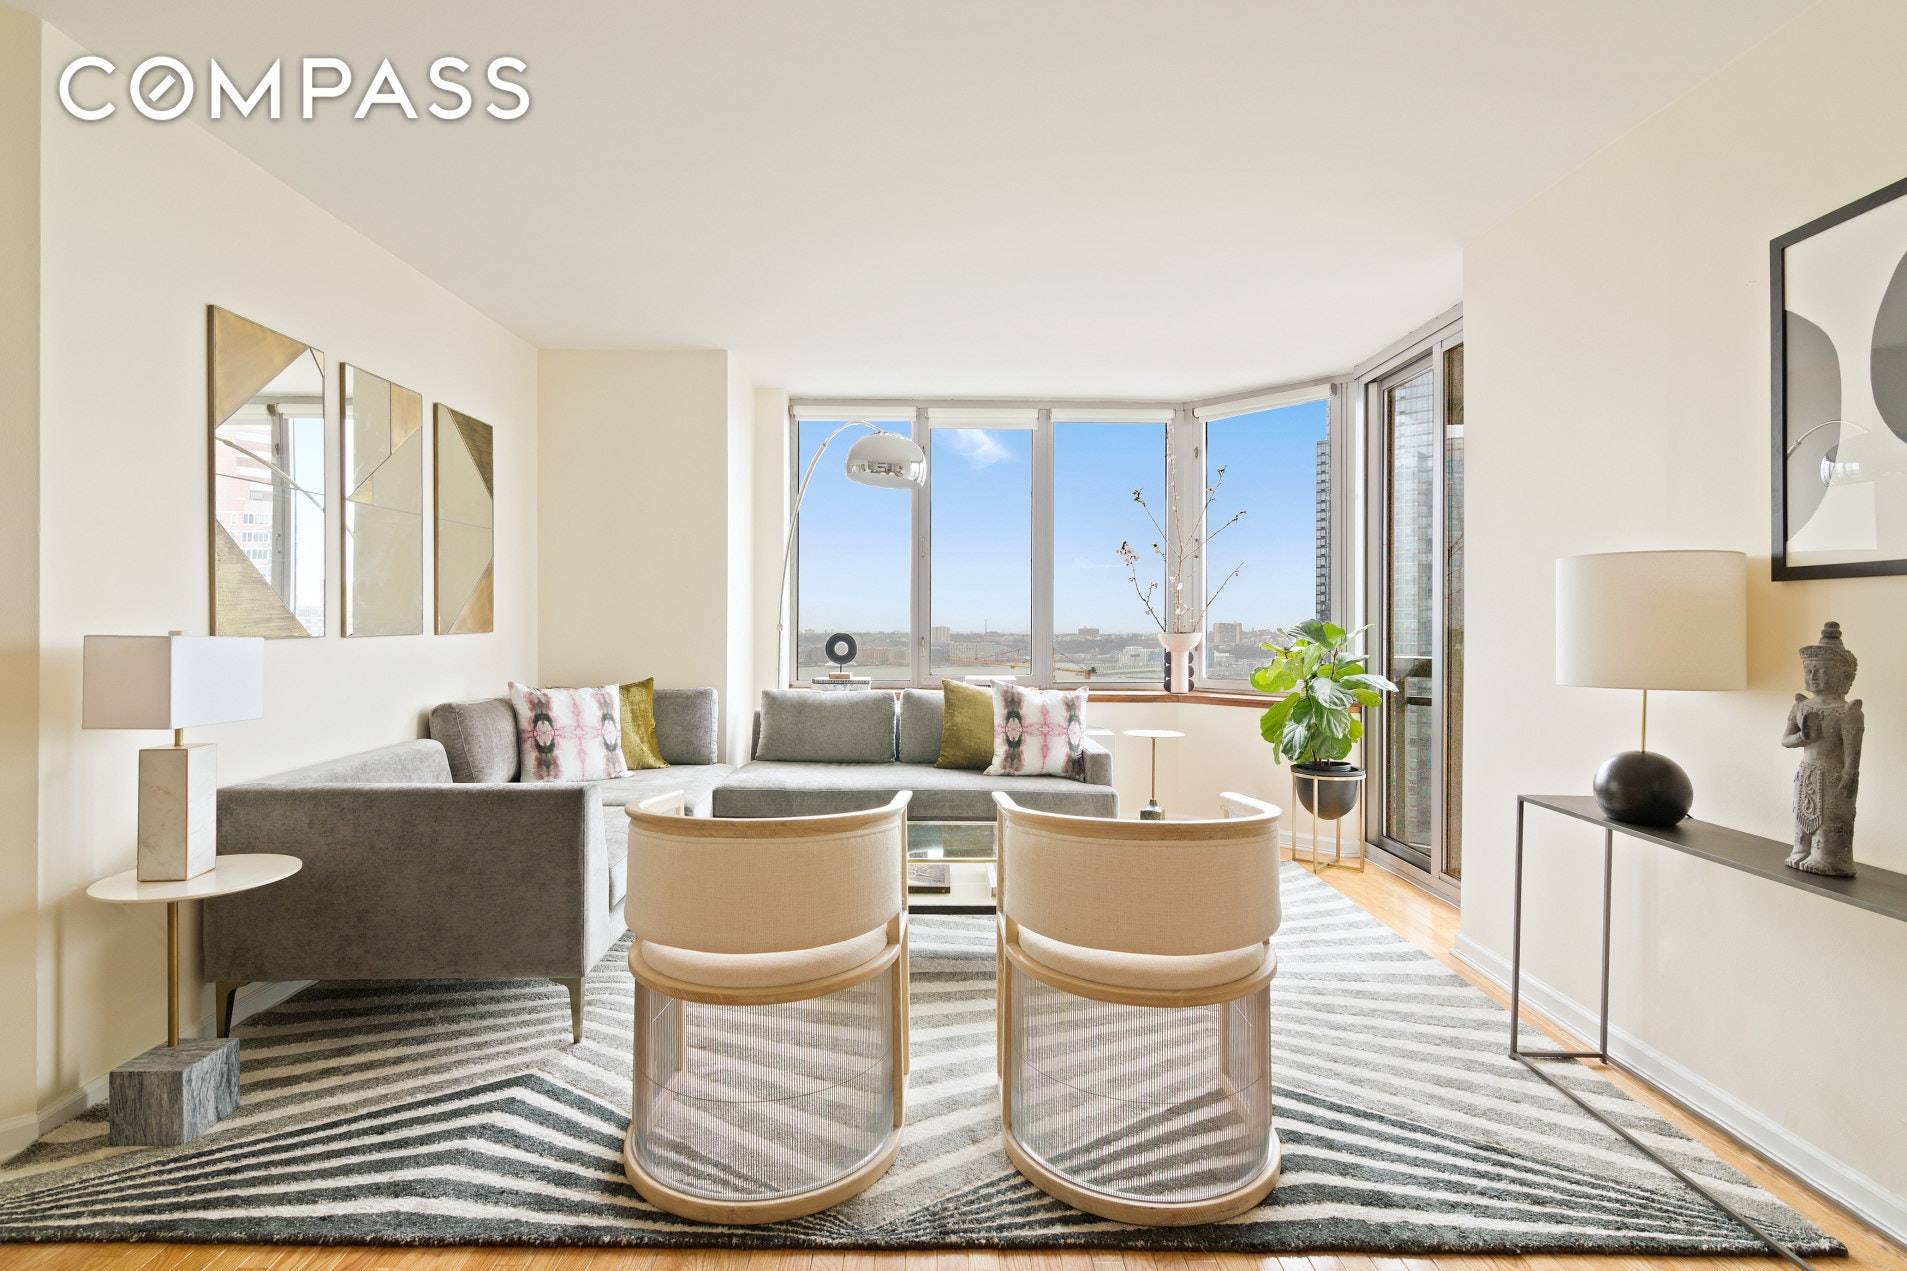 500 West 43rd Street, 38F is a chic, one bedroom condo with stunning river views.